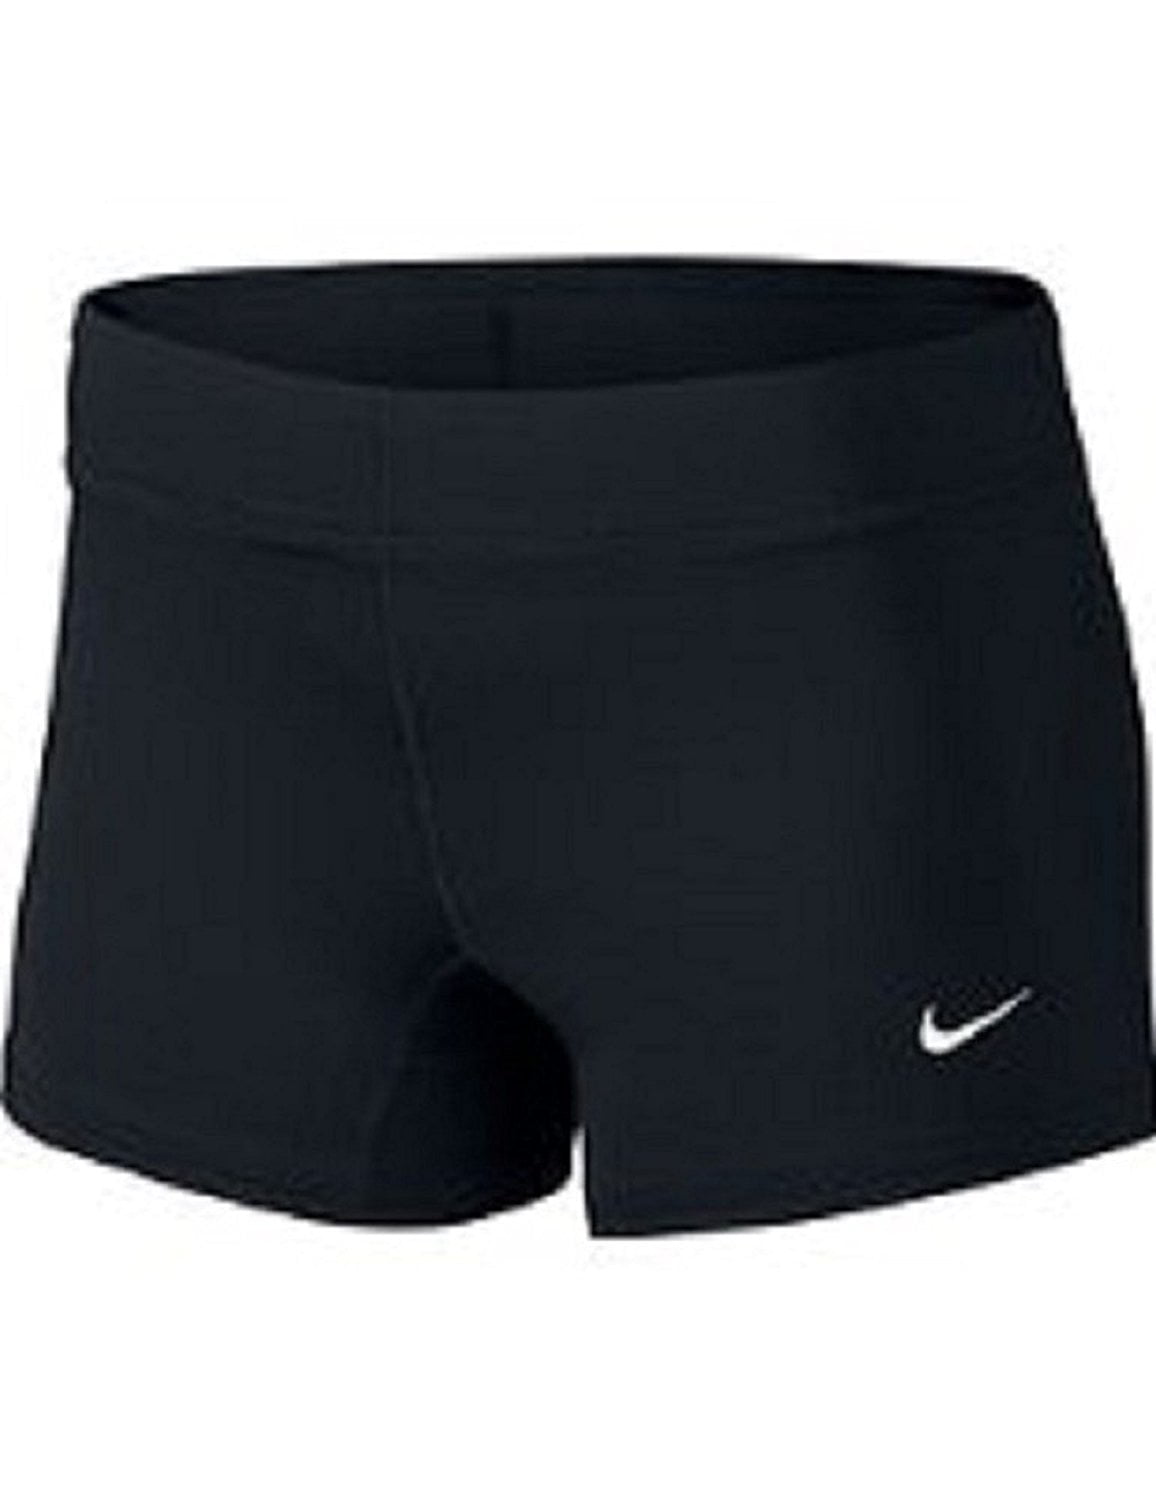 invention Peddling Chewing gum Nike Performance Women's Volleyball Game Shorts (X-Large, Black) -  Walmart.com